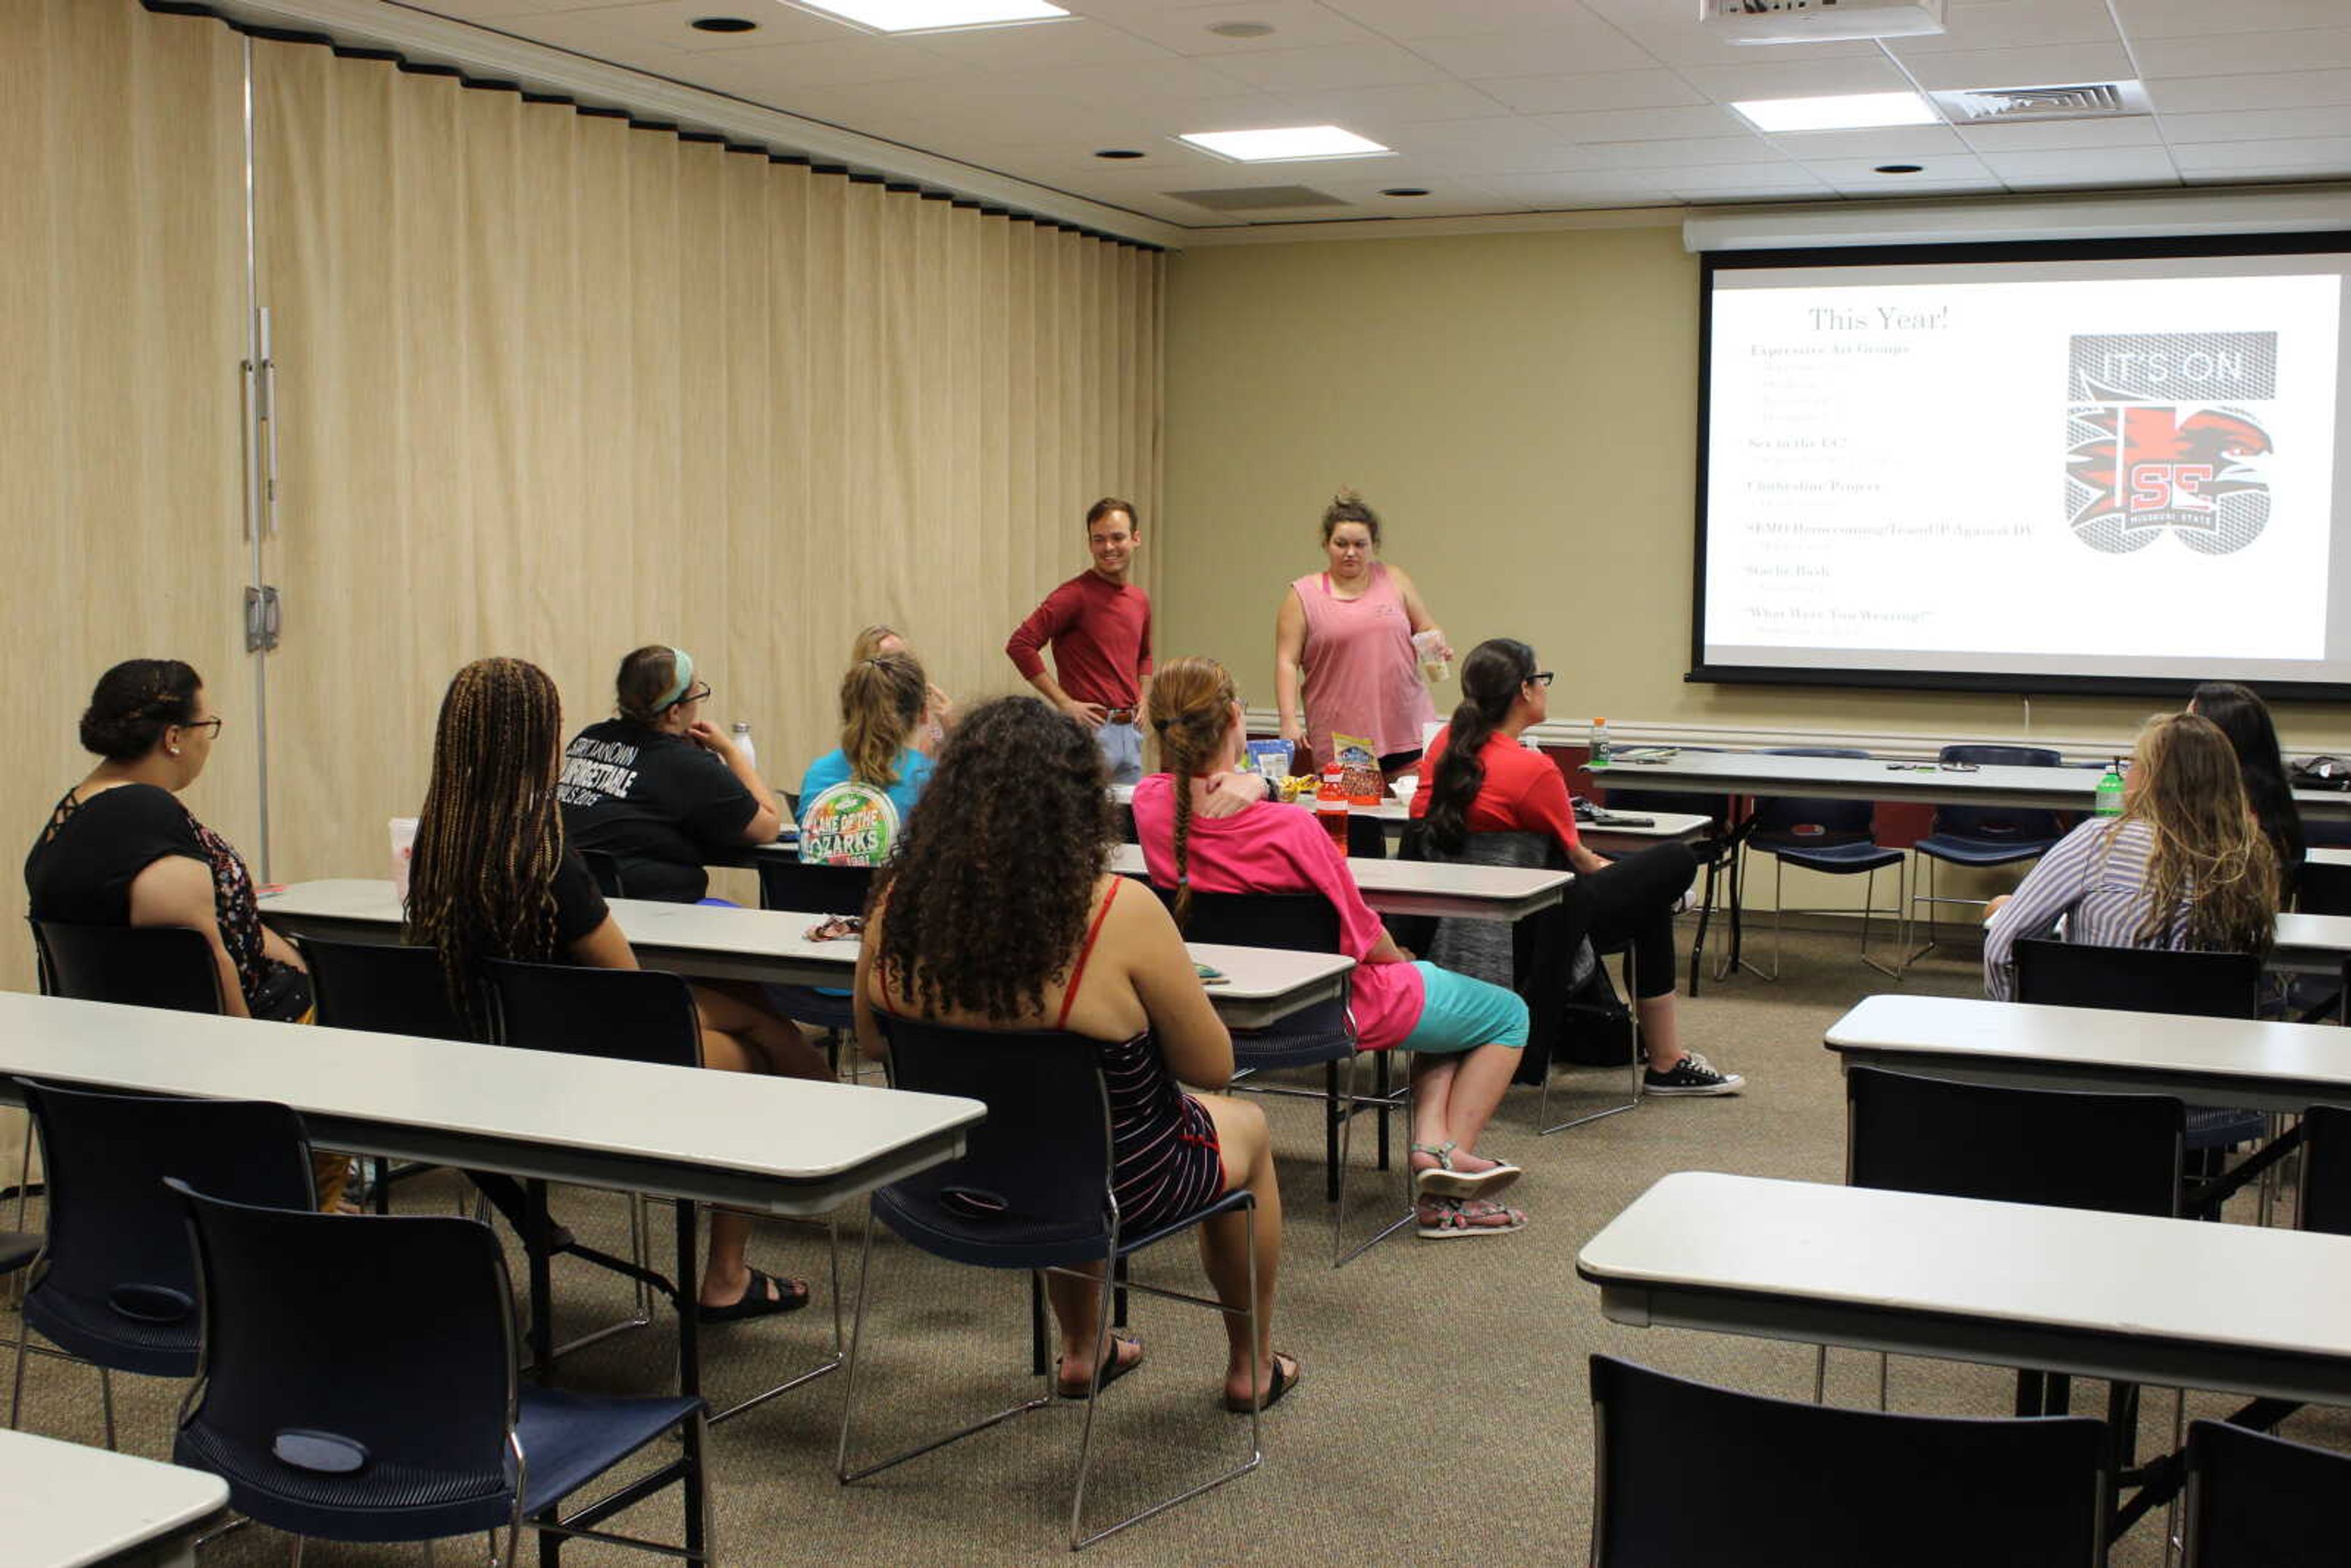 Redhawks Rising, an organization dedicated to ending sexual assault, held their first meeting Aug. 27.